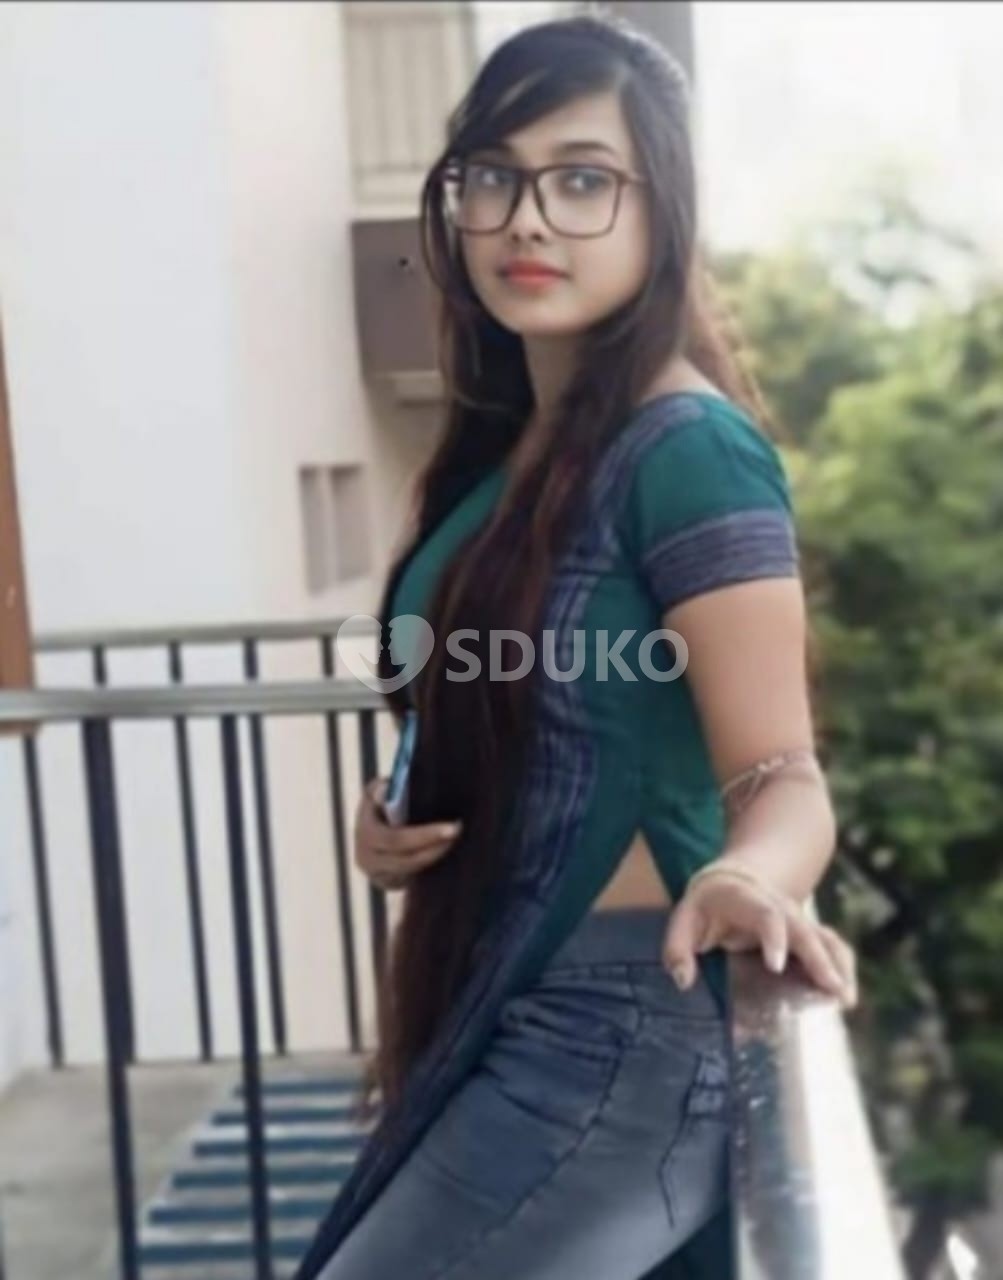 Madurai 💙🔥.TODAY LOW PRICE 💯 SAFE AND SECURE SERVICE INCALL OUTCALL AVAILABLE CALL ME